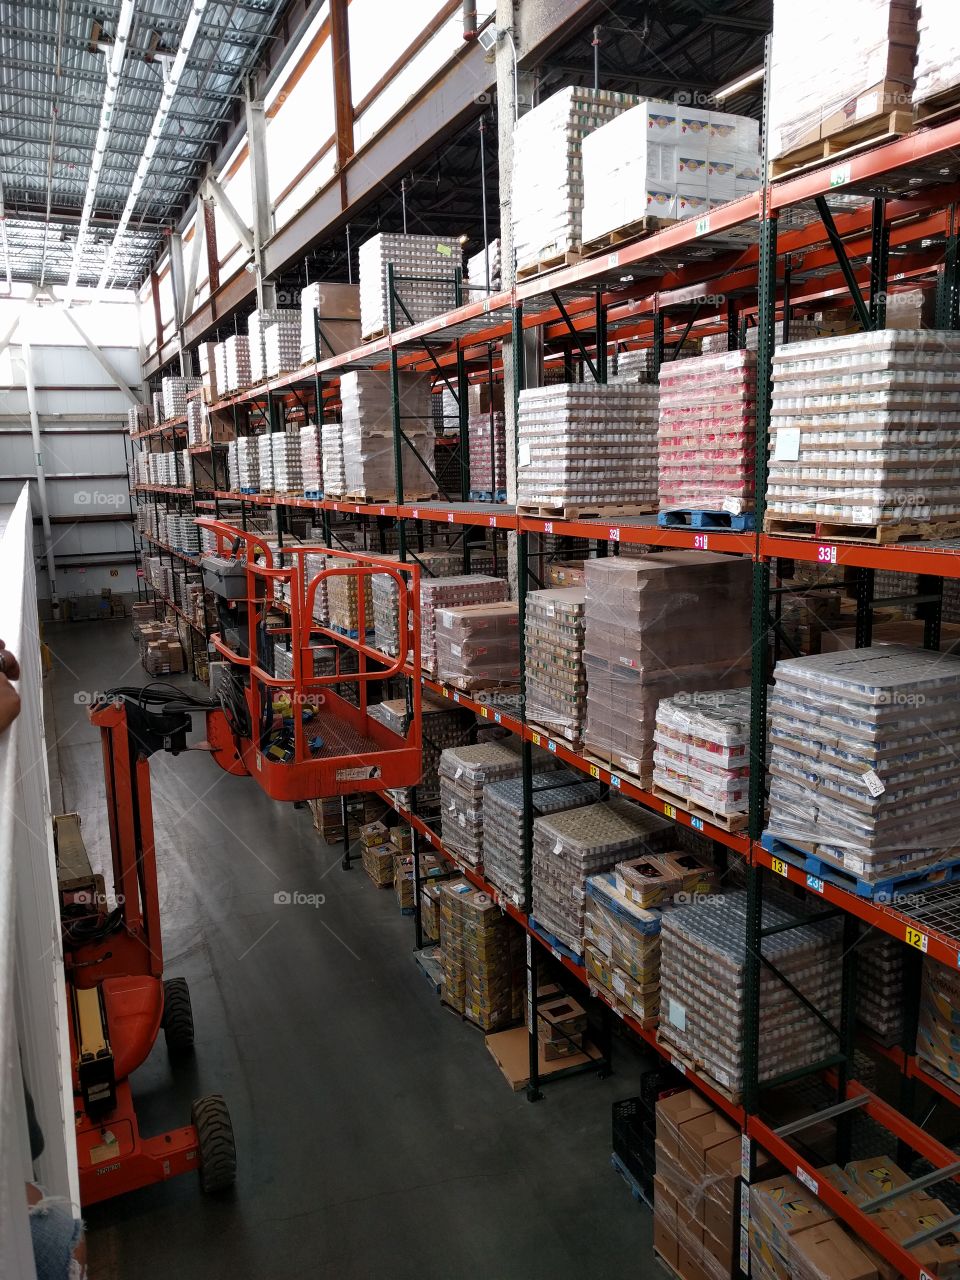 Warehouse, Stock, Grinder, Industry, Crate